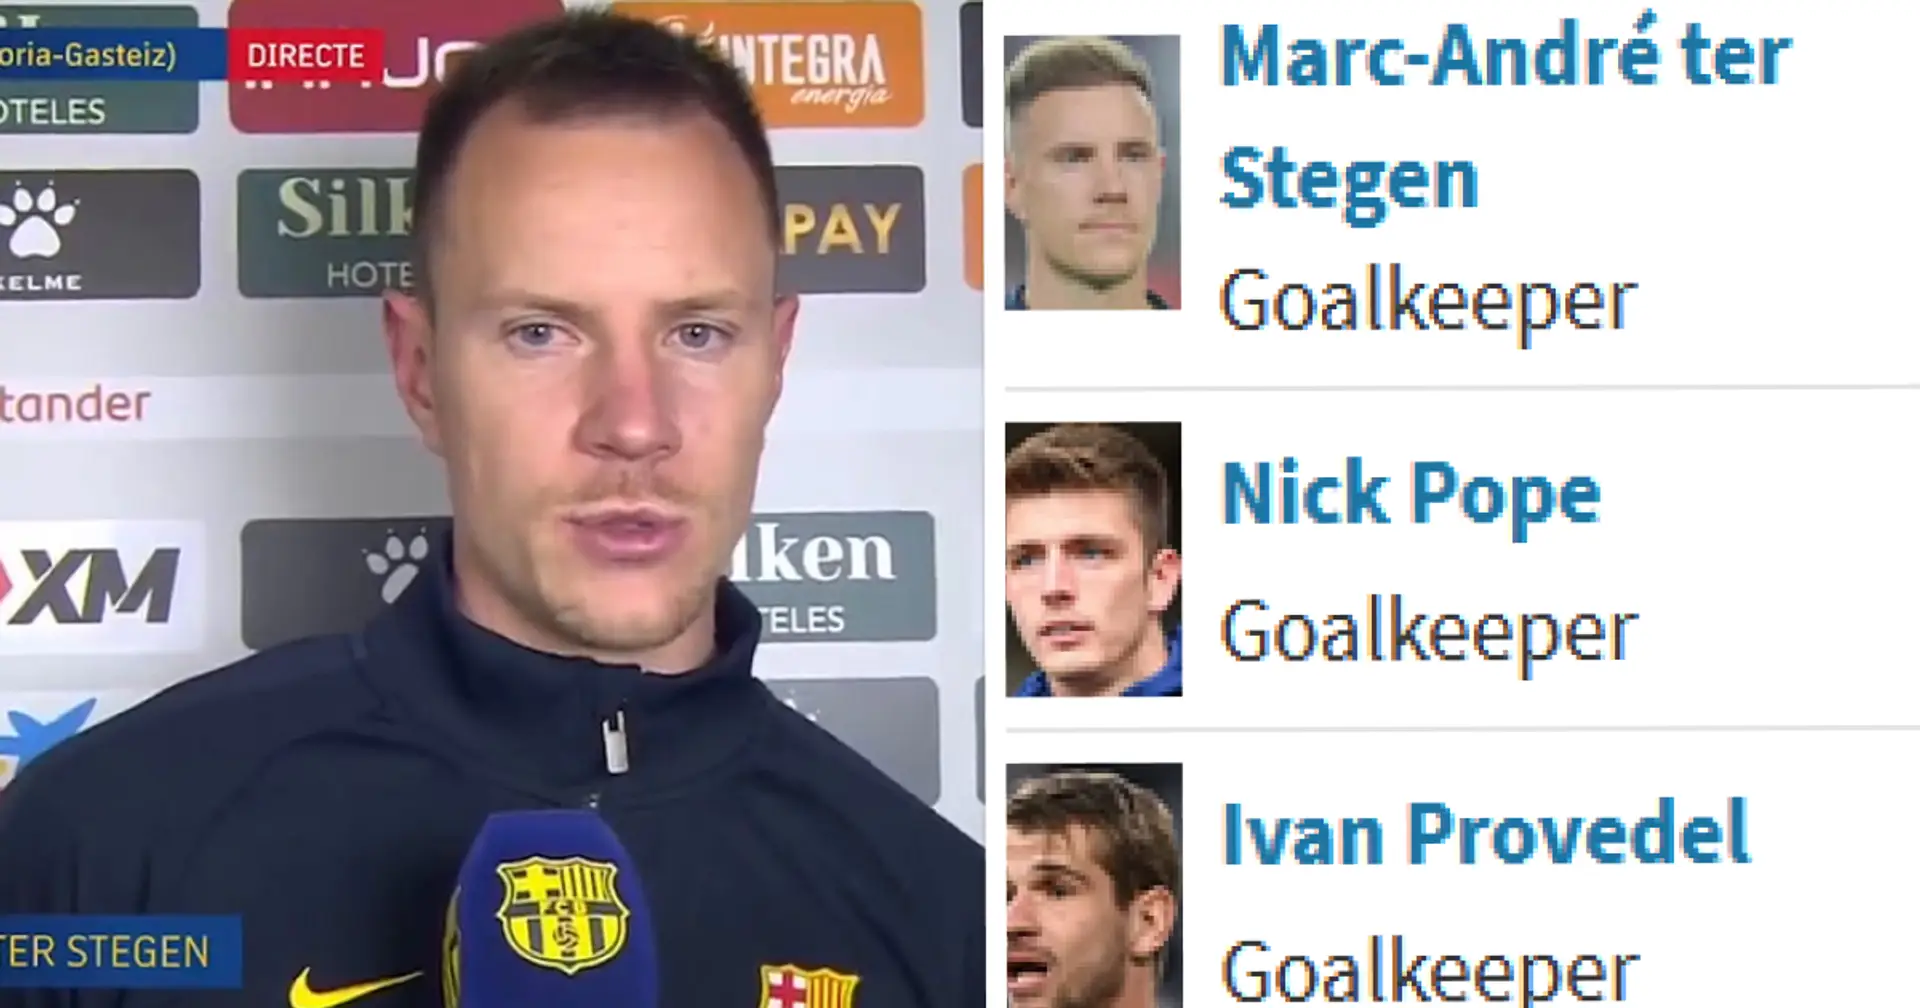 17 shutouts, 7 goals conceded: Ter Stegen extends lead as most in-form goalie in Europe 